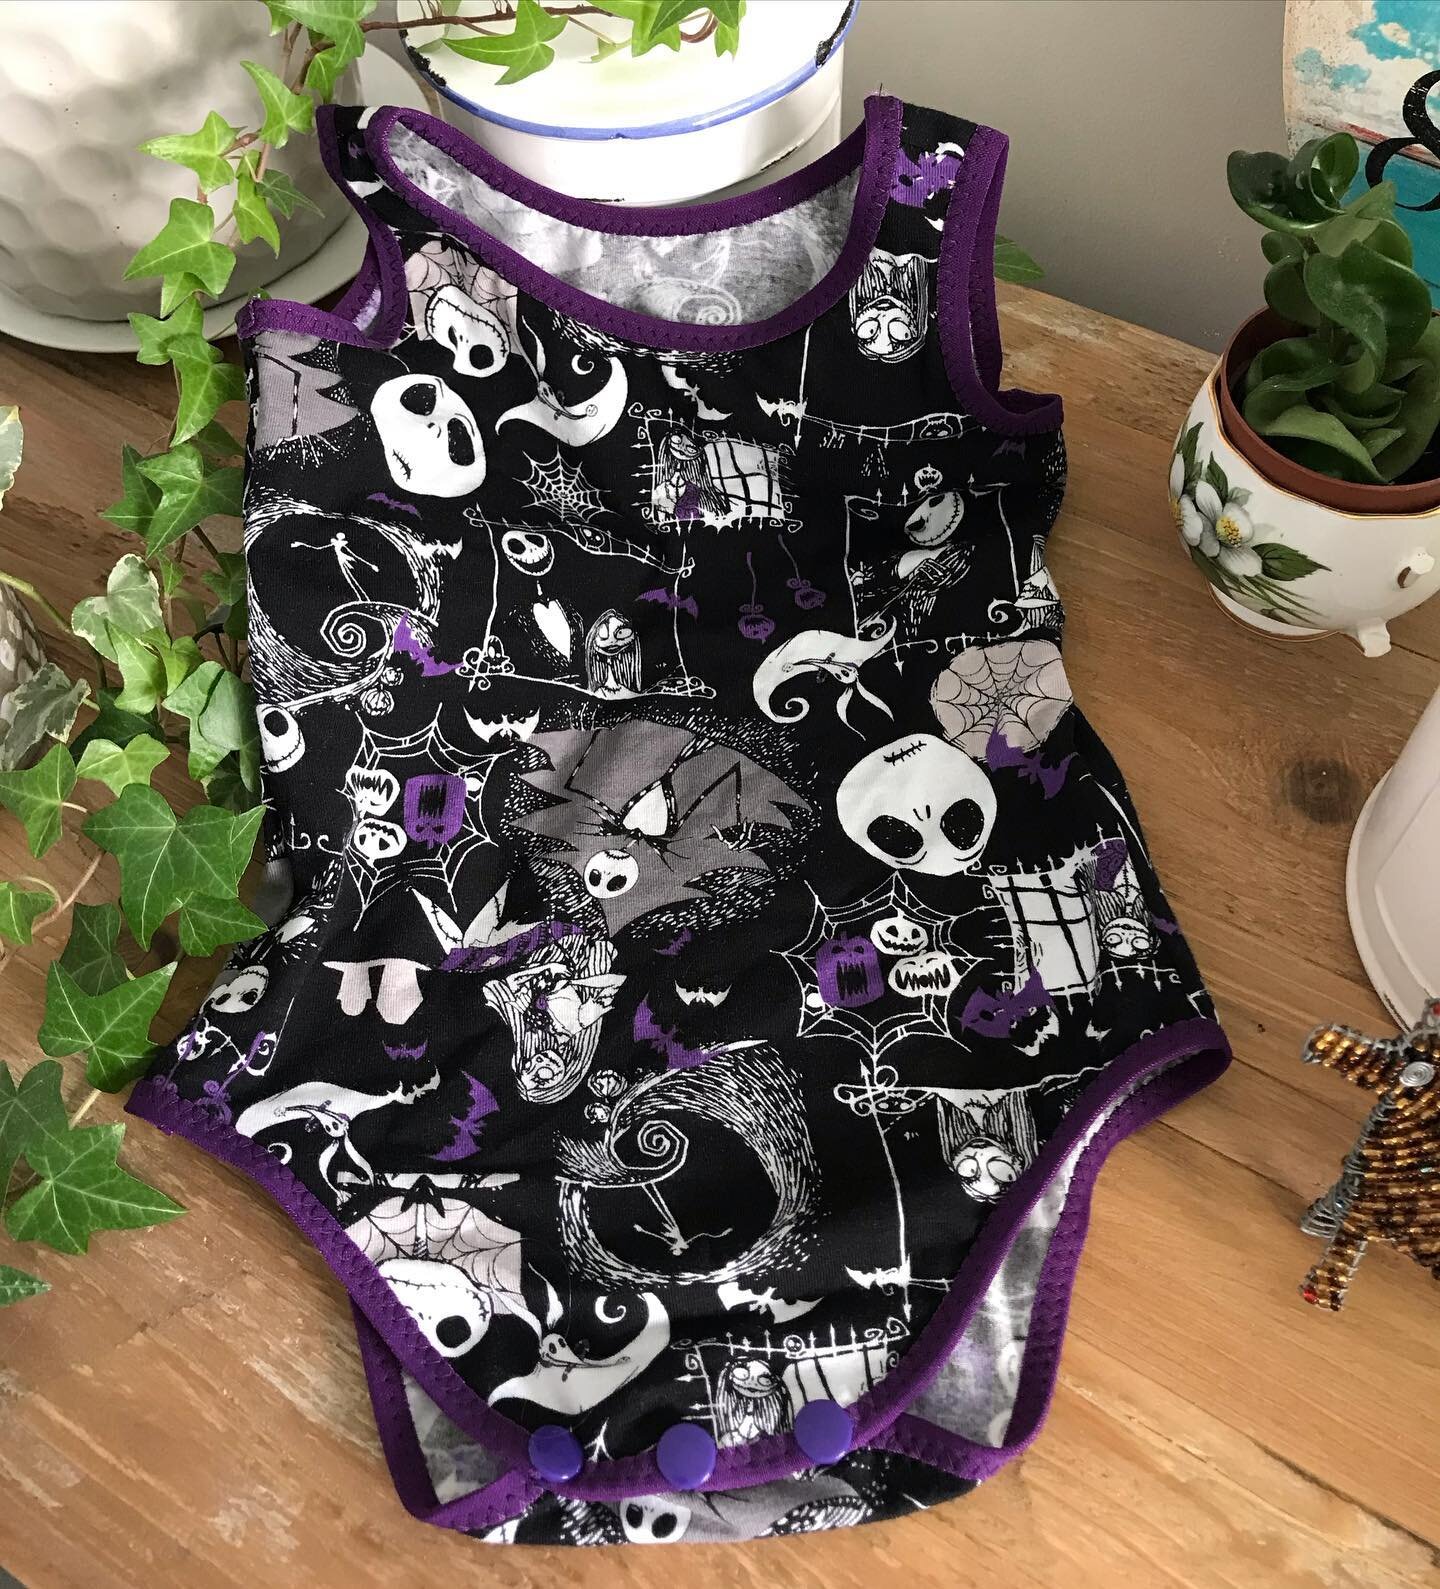 Halloween is coming up with giant steps! Lucky for me the fabric arrived just in time to make this awesome Halloween Onesie. Kits or Made to Order will be added to my website (link in bio) over the next few days. 

#halloween #baby #gift #onesie #mad